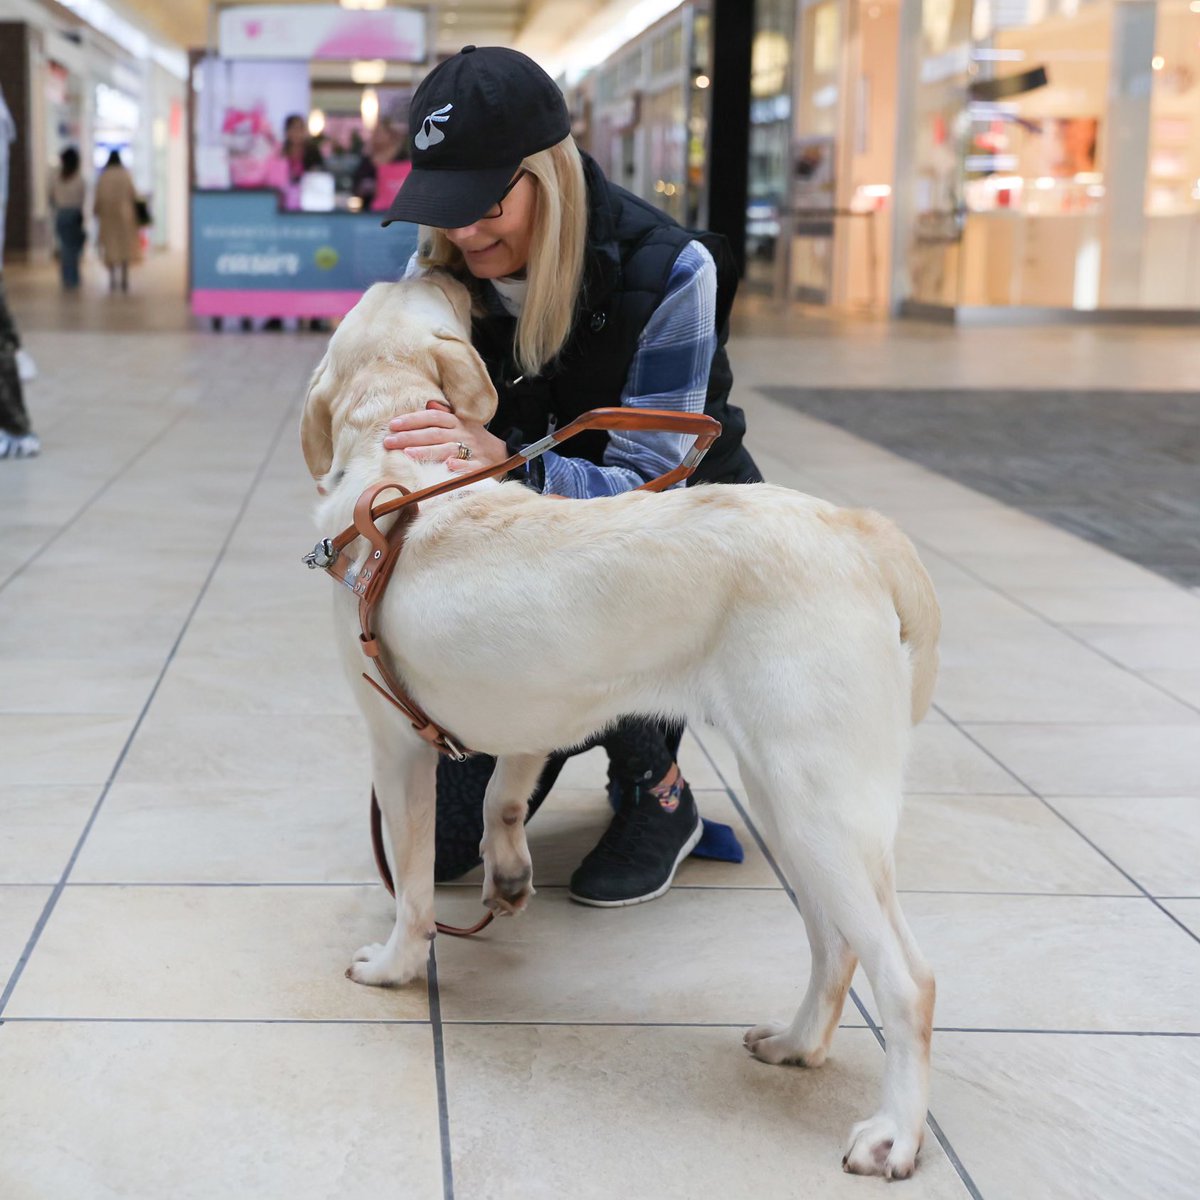 When someone who is legally blind has or low-vision is matched with their guide dog, an unbreakable bond is formed.  Join us in making a difference by visiting guidedog.org 💙🐾